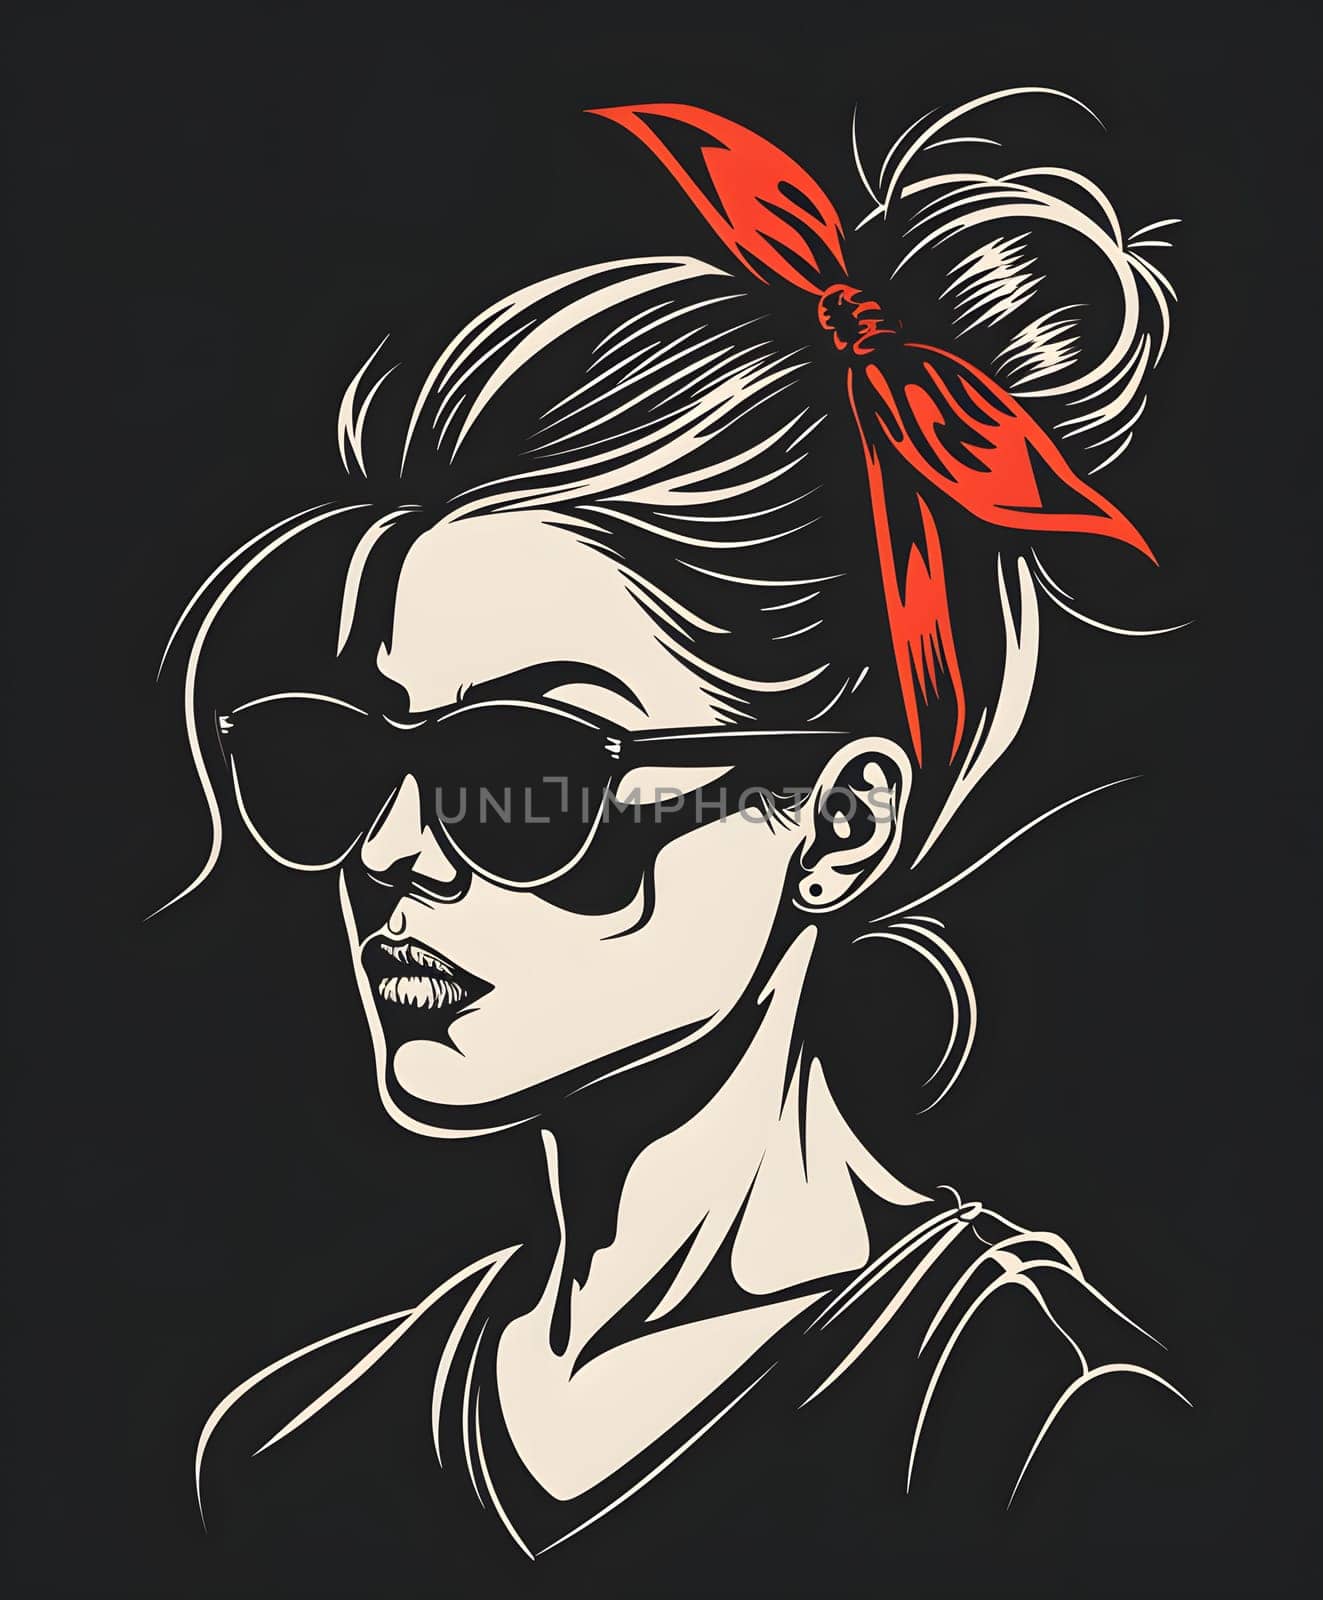 Woman with stylish sunglasses and a red bow hair accessory by Nadtochiy